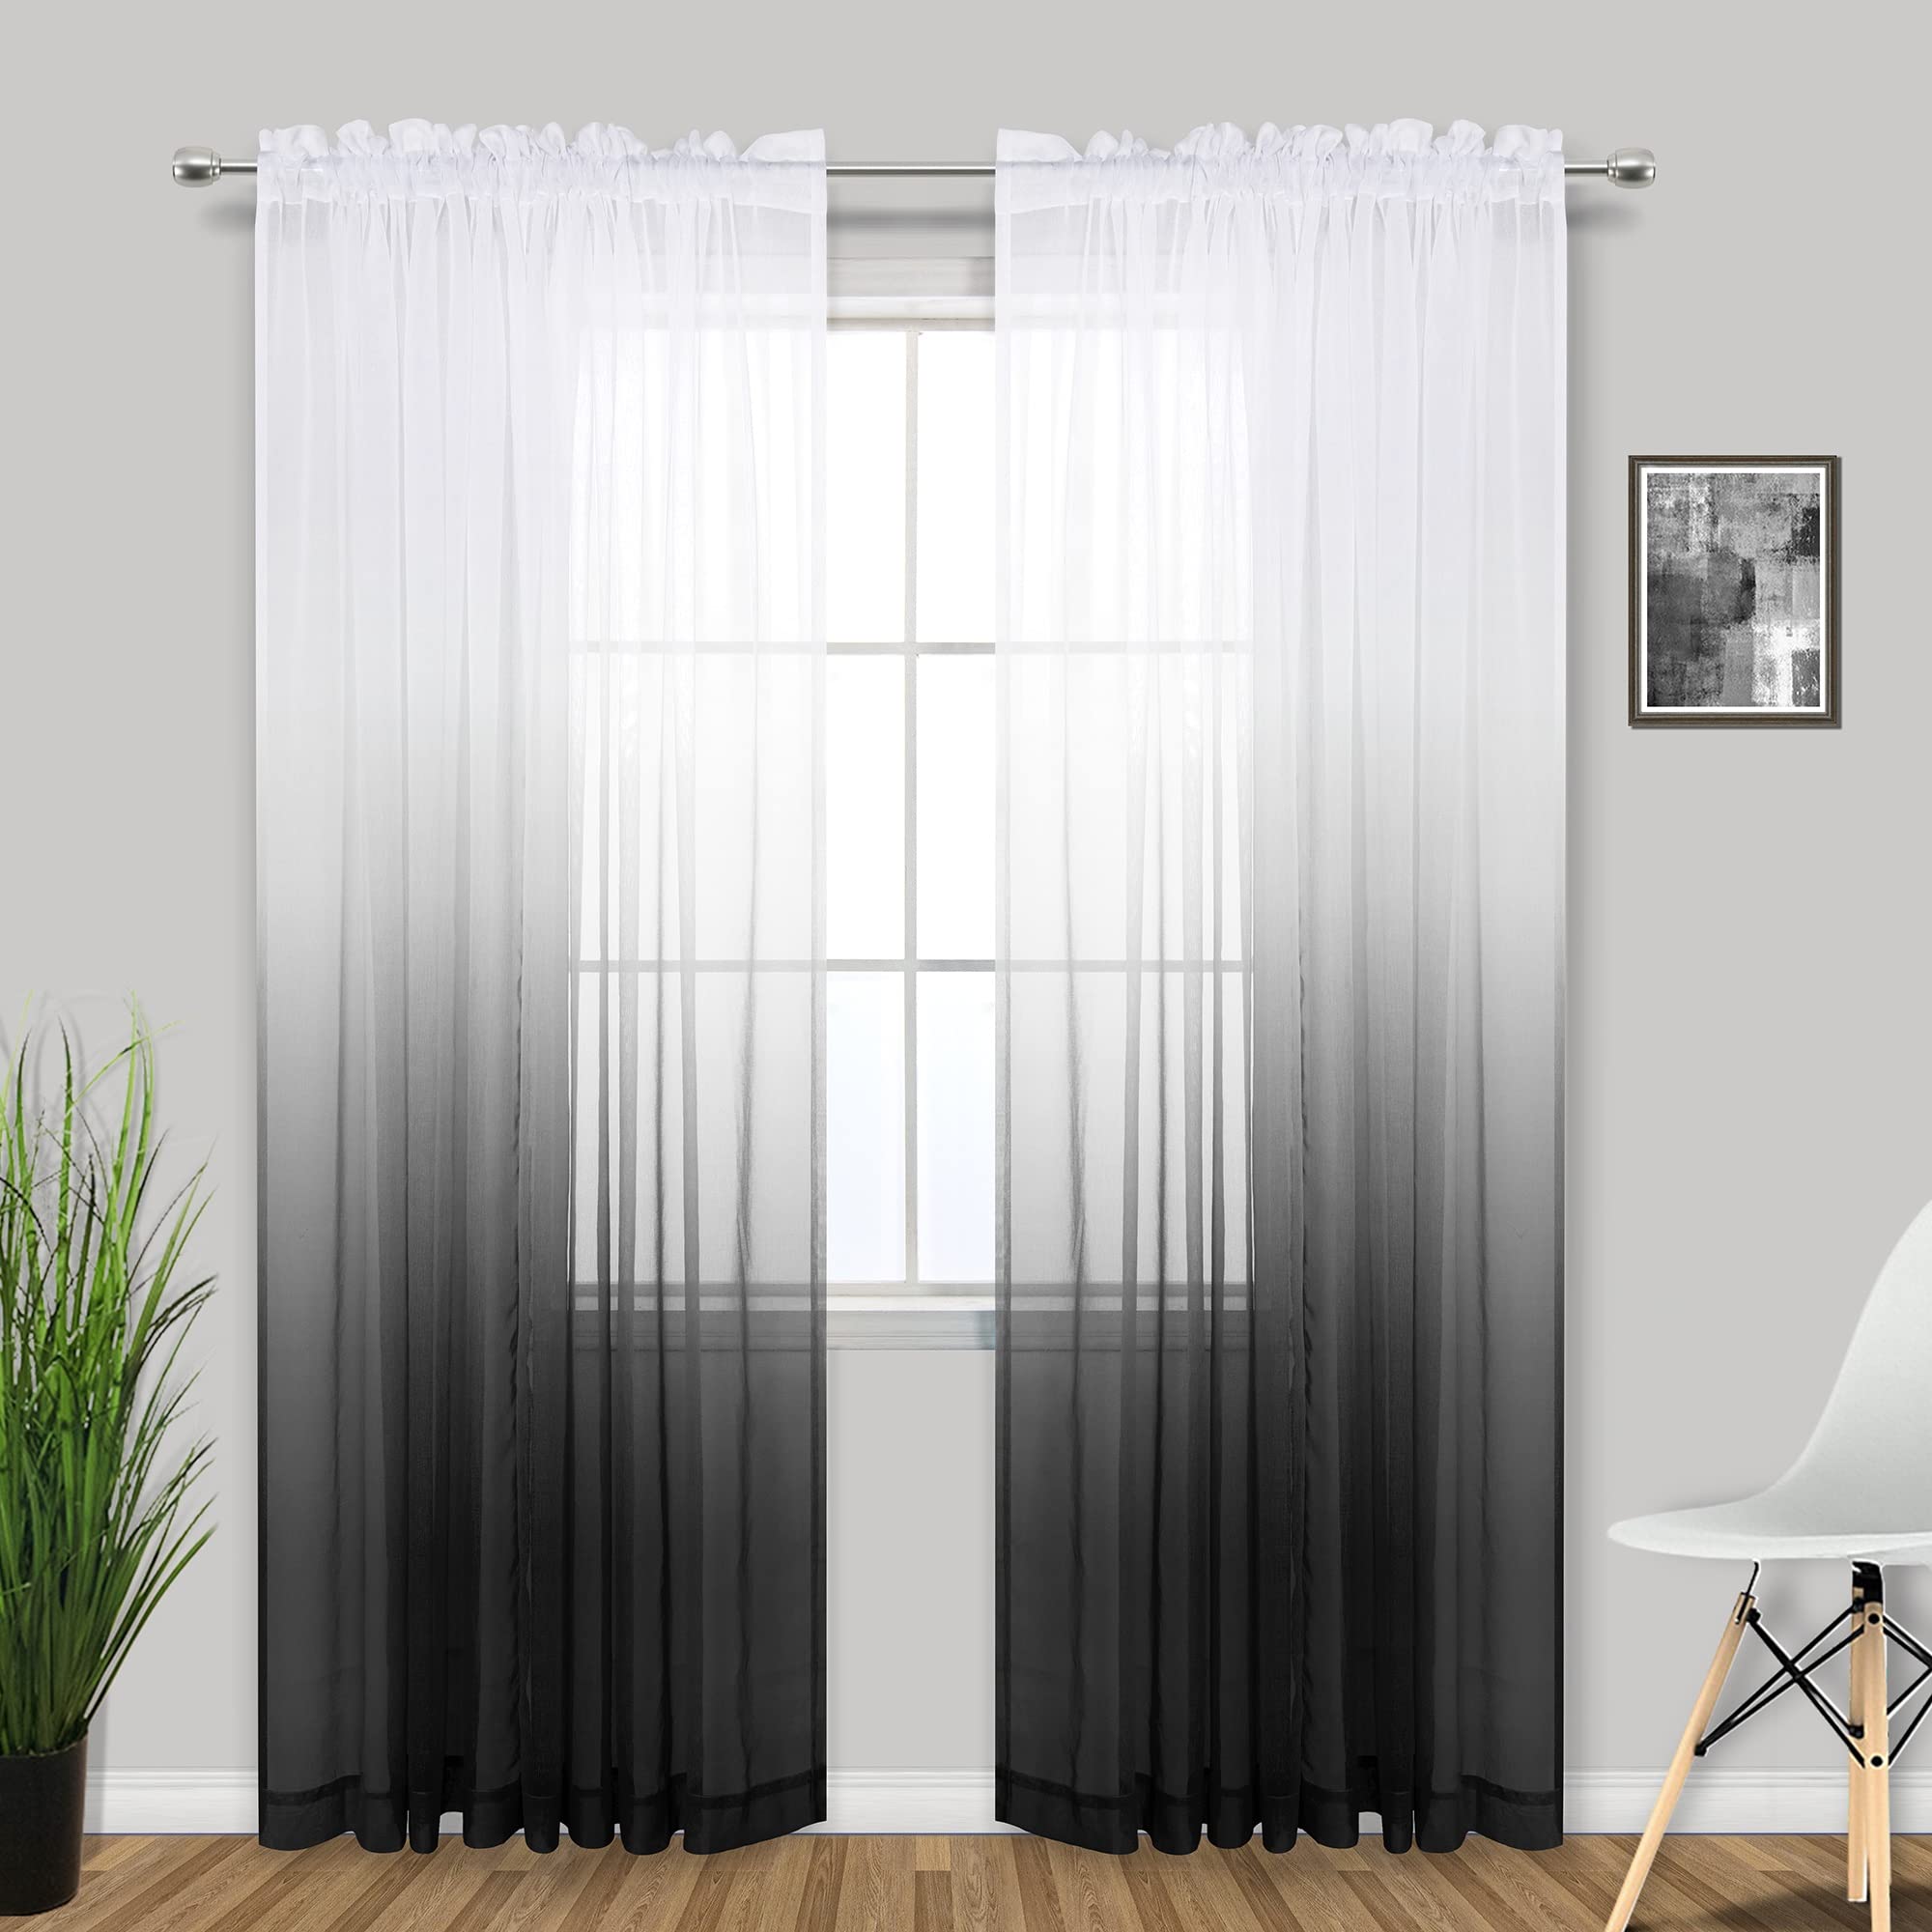 KOUFALL Modern Decorative Unique Faux Linen Ombre Semi Sheer White and Black Sheer Curtains for Living Room Bedroom Boys Room De